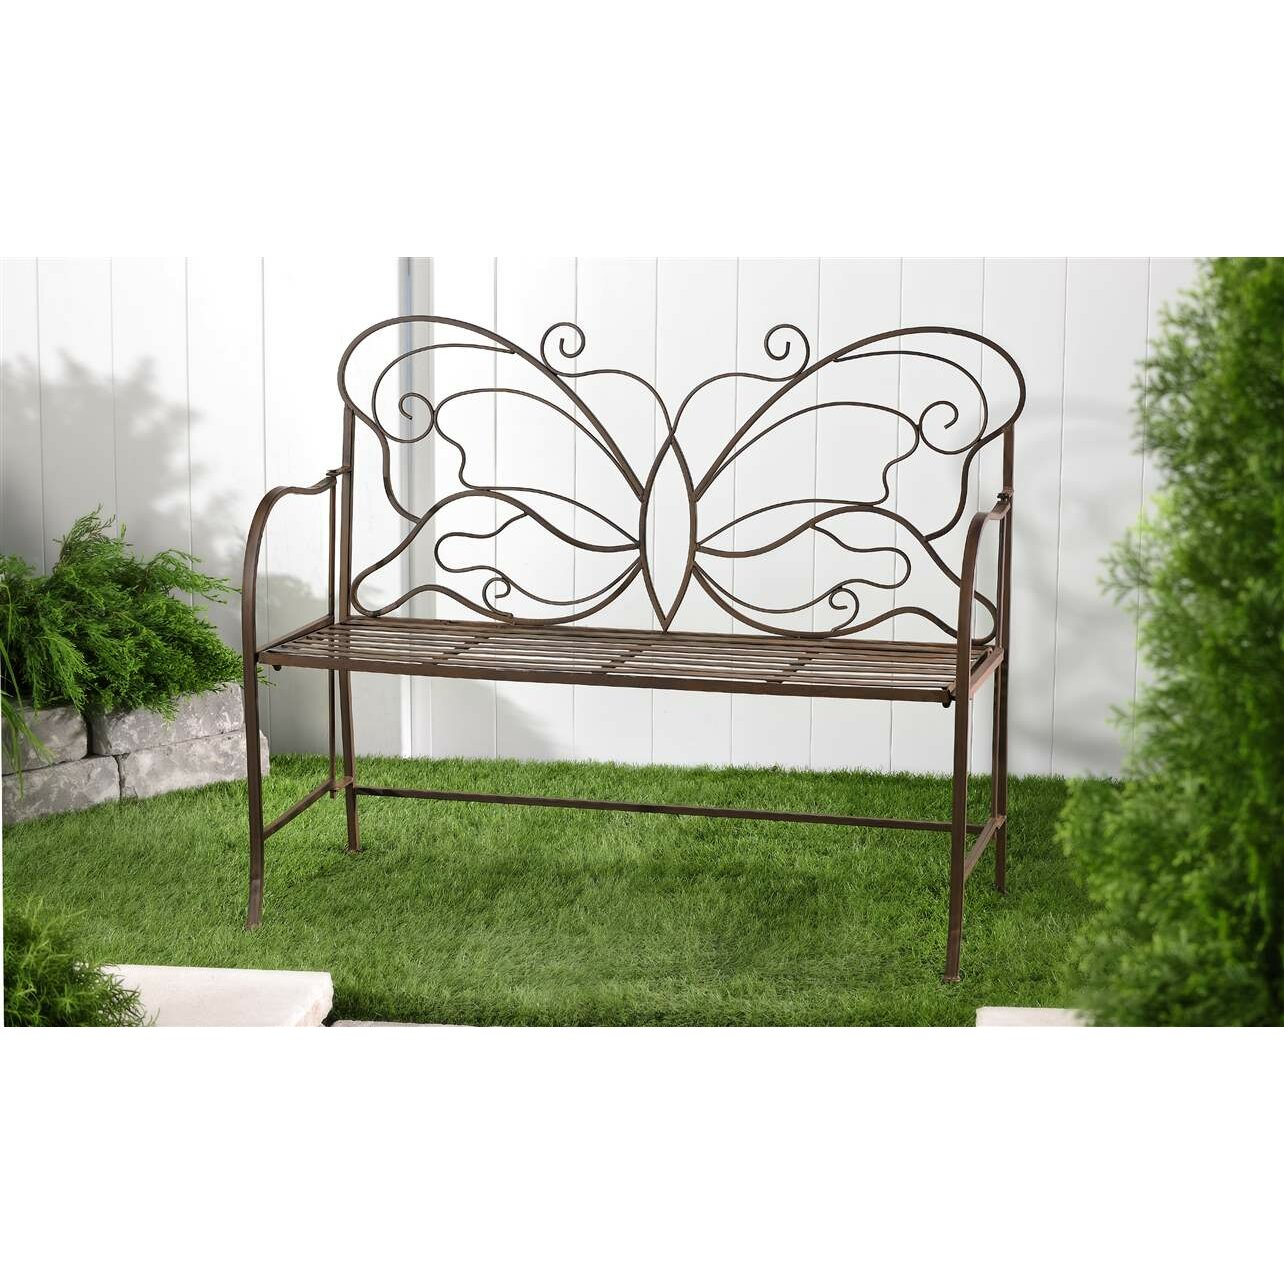 Giftcraft Butterfly Garden Bench & Reviews